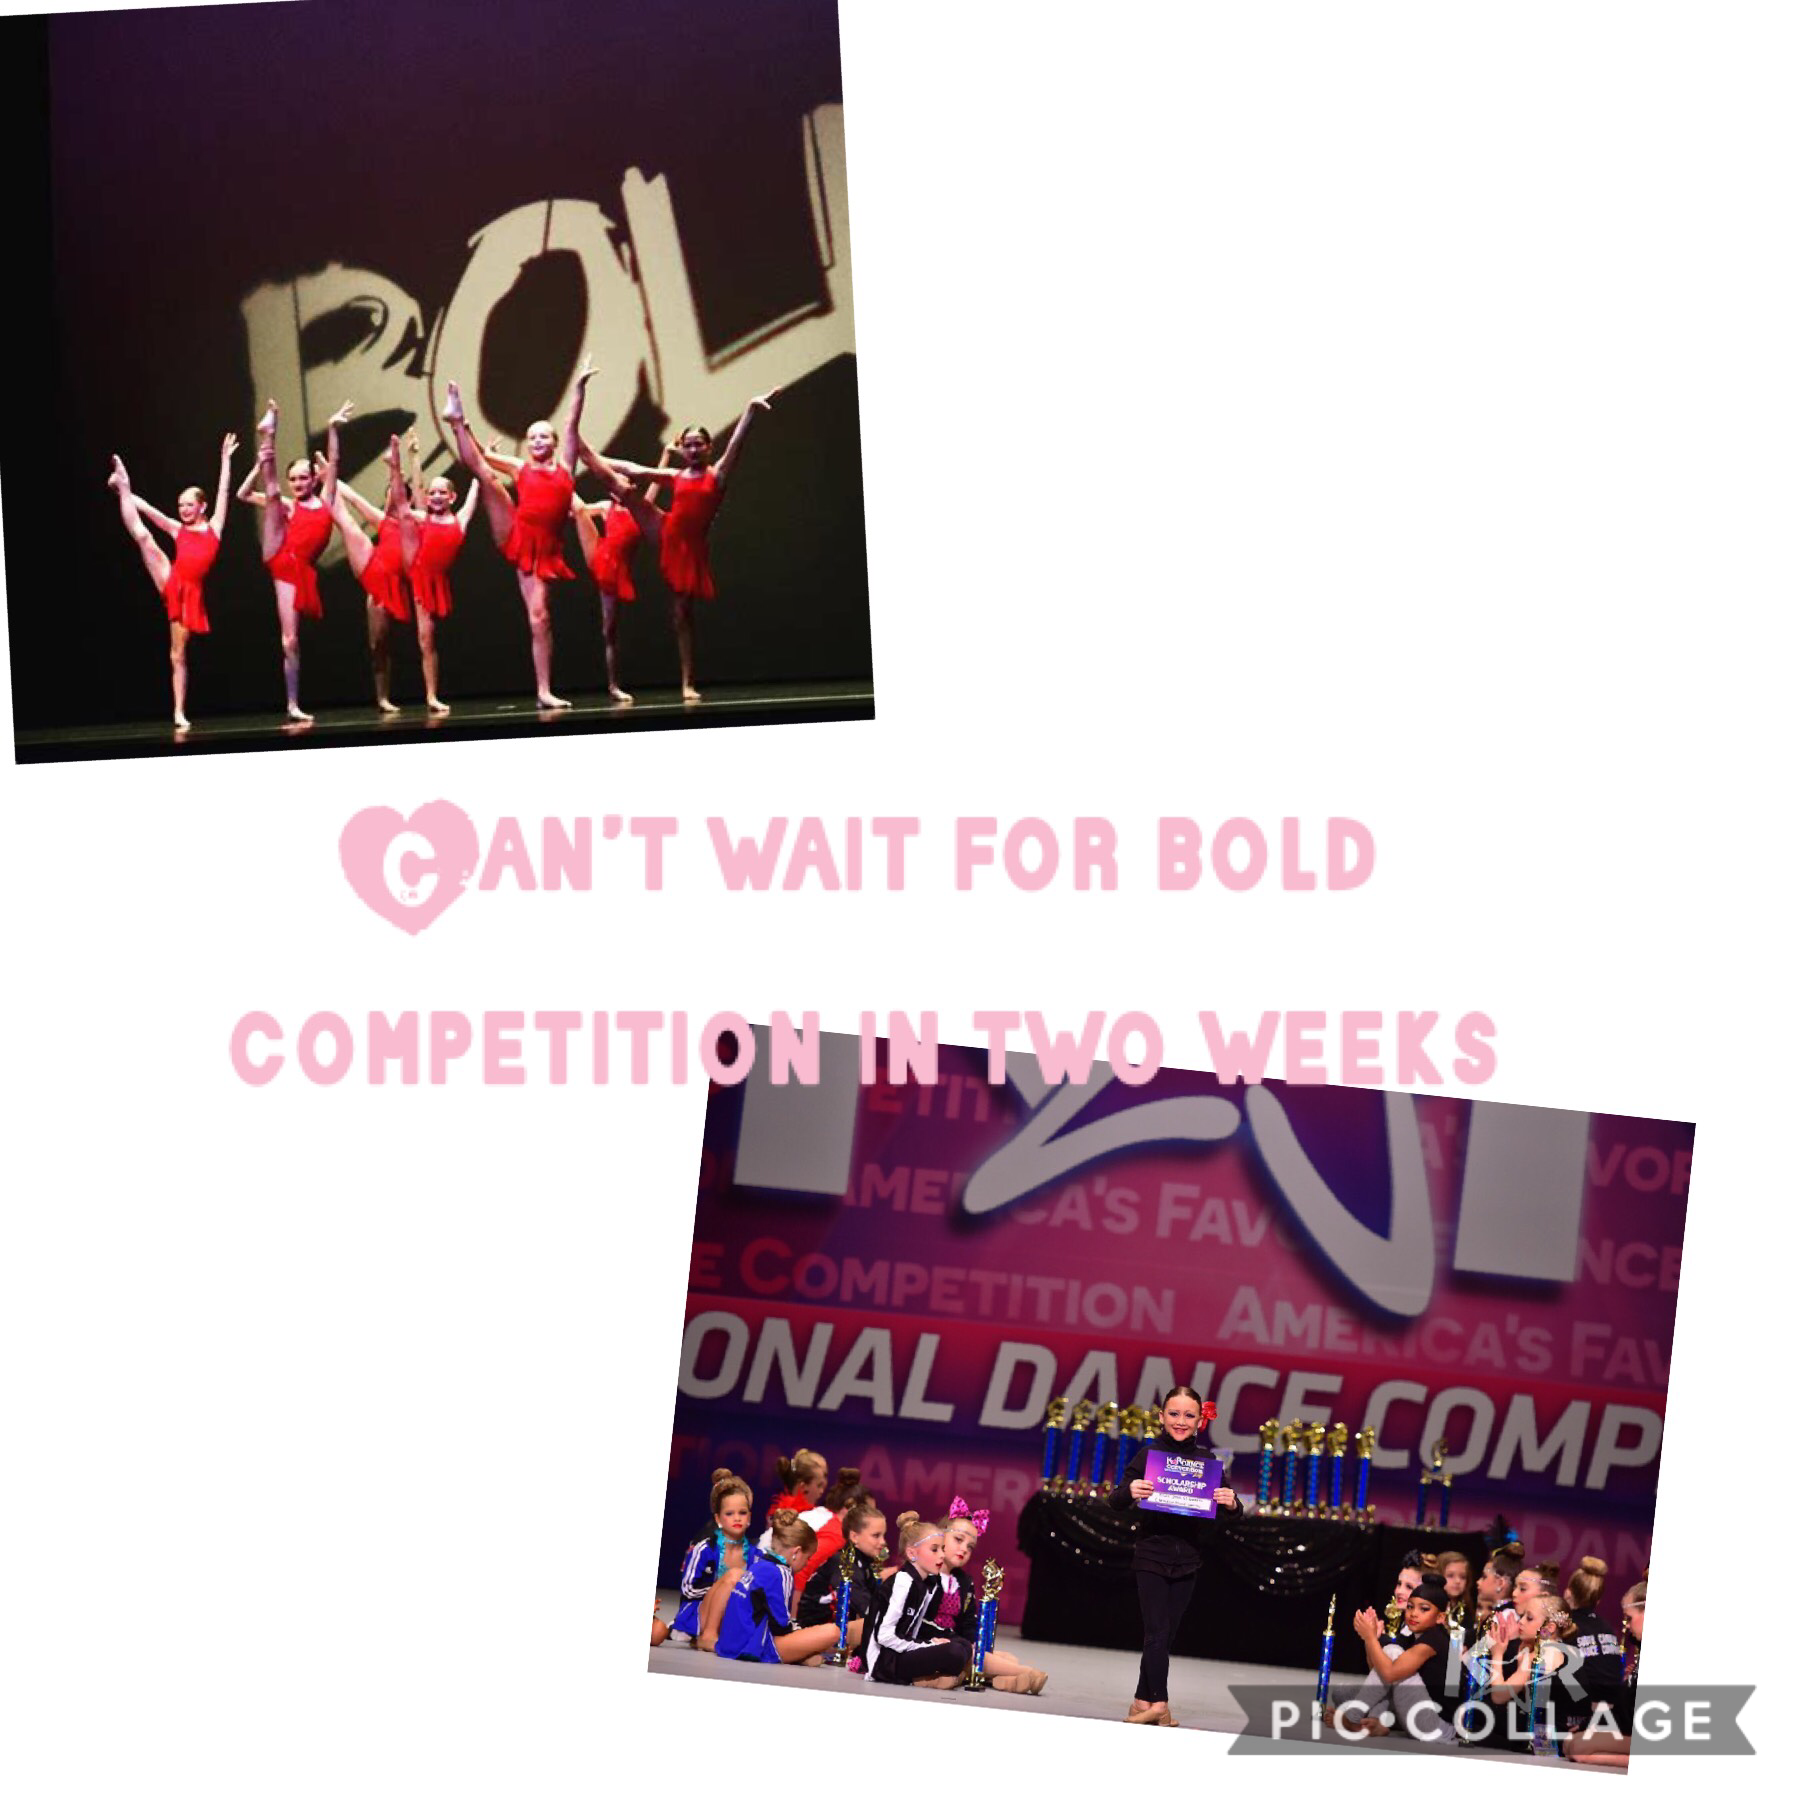 Bold dance competition coming up !! 